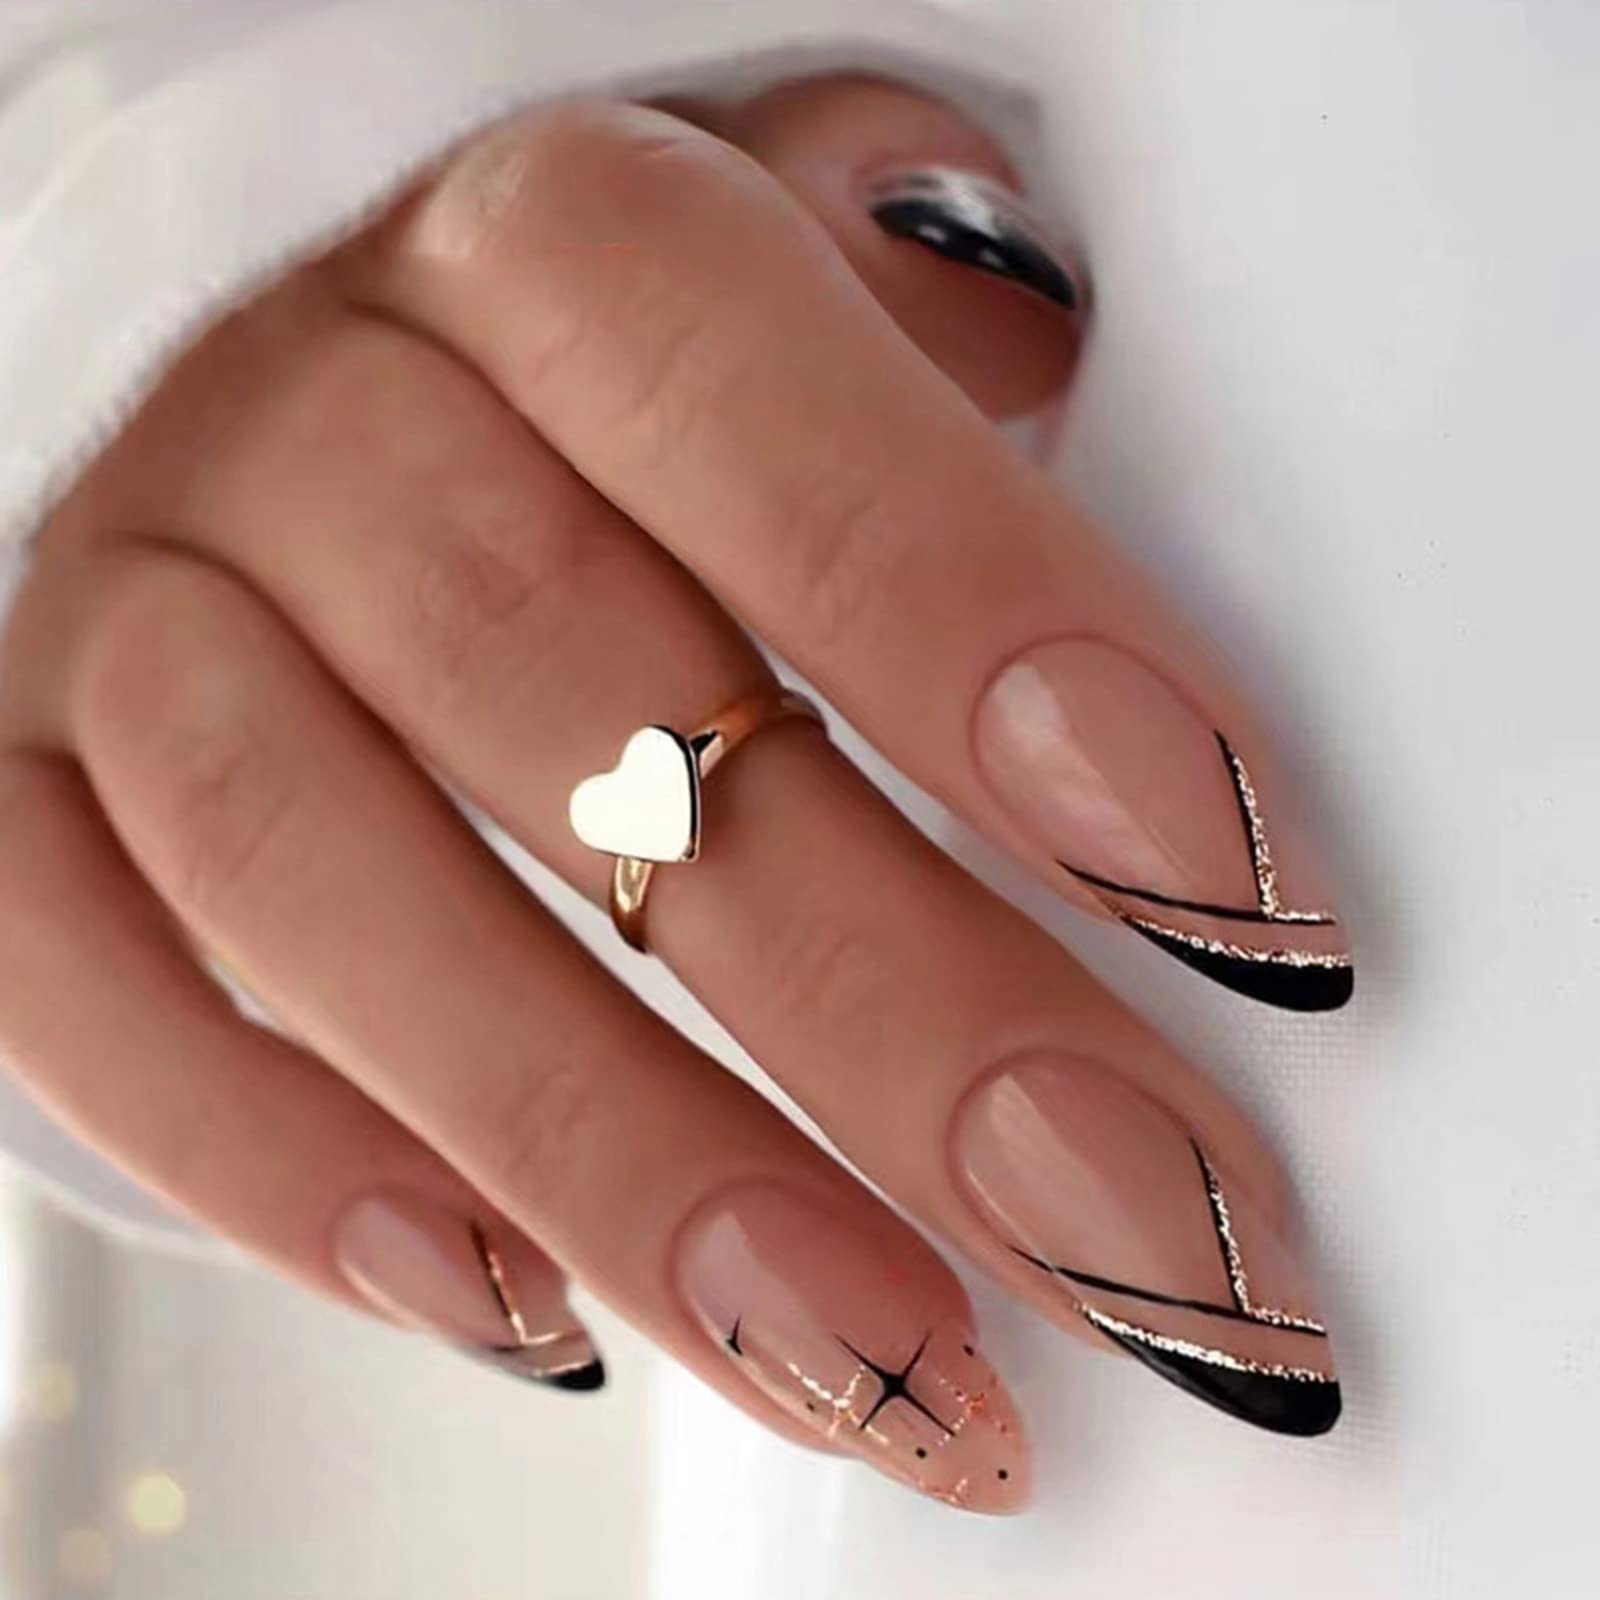 46 Black and Gold Nail Designs for Every Season and Occasion